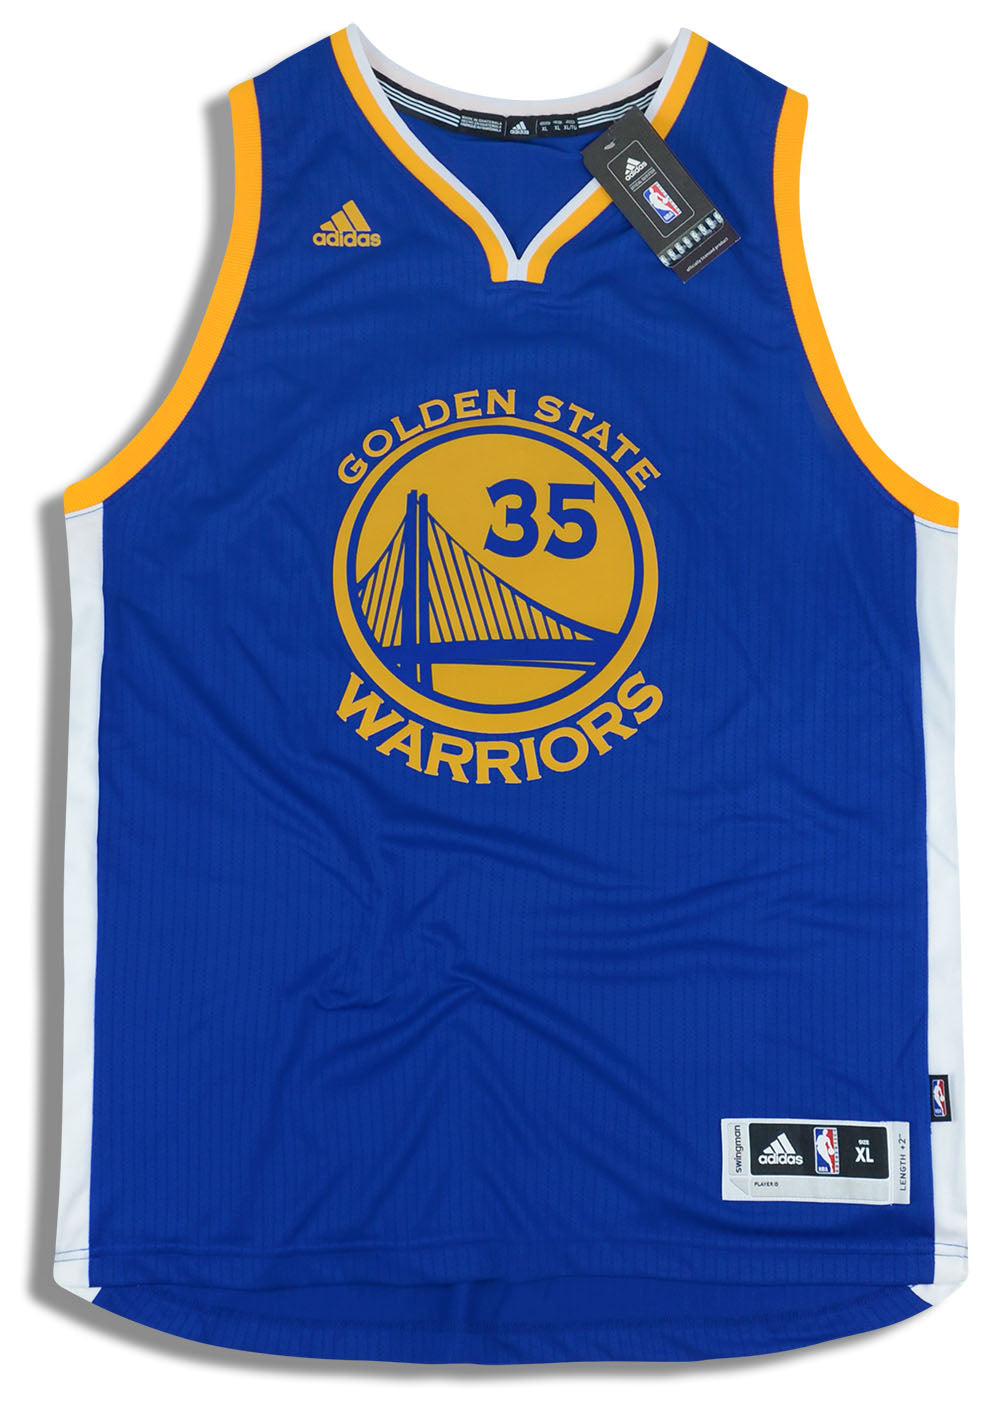 2016-17 GOLDEN STATE WARRIORS DURANT #35 ADIDAS JERSEY (AWAY) XL - W/TAGS